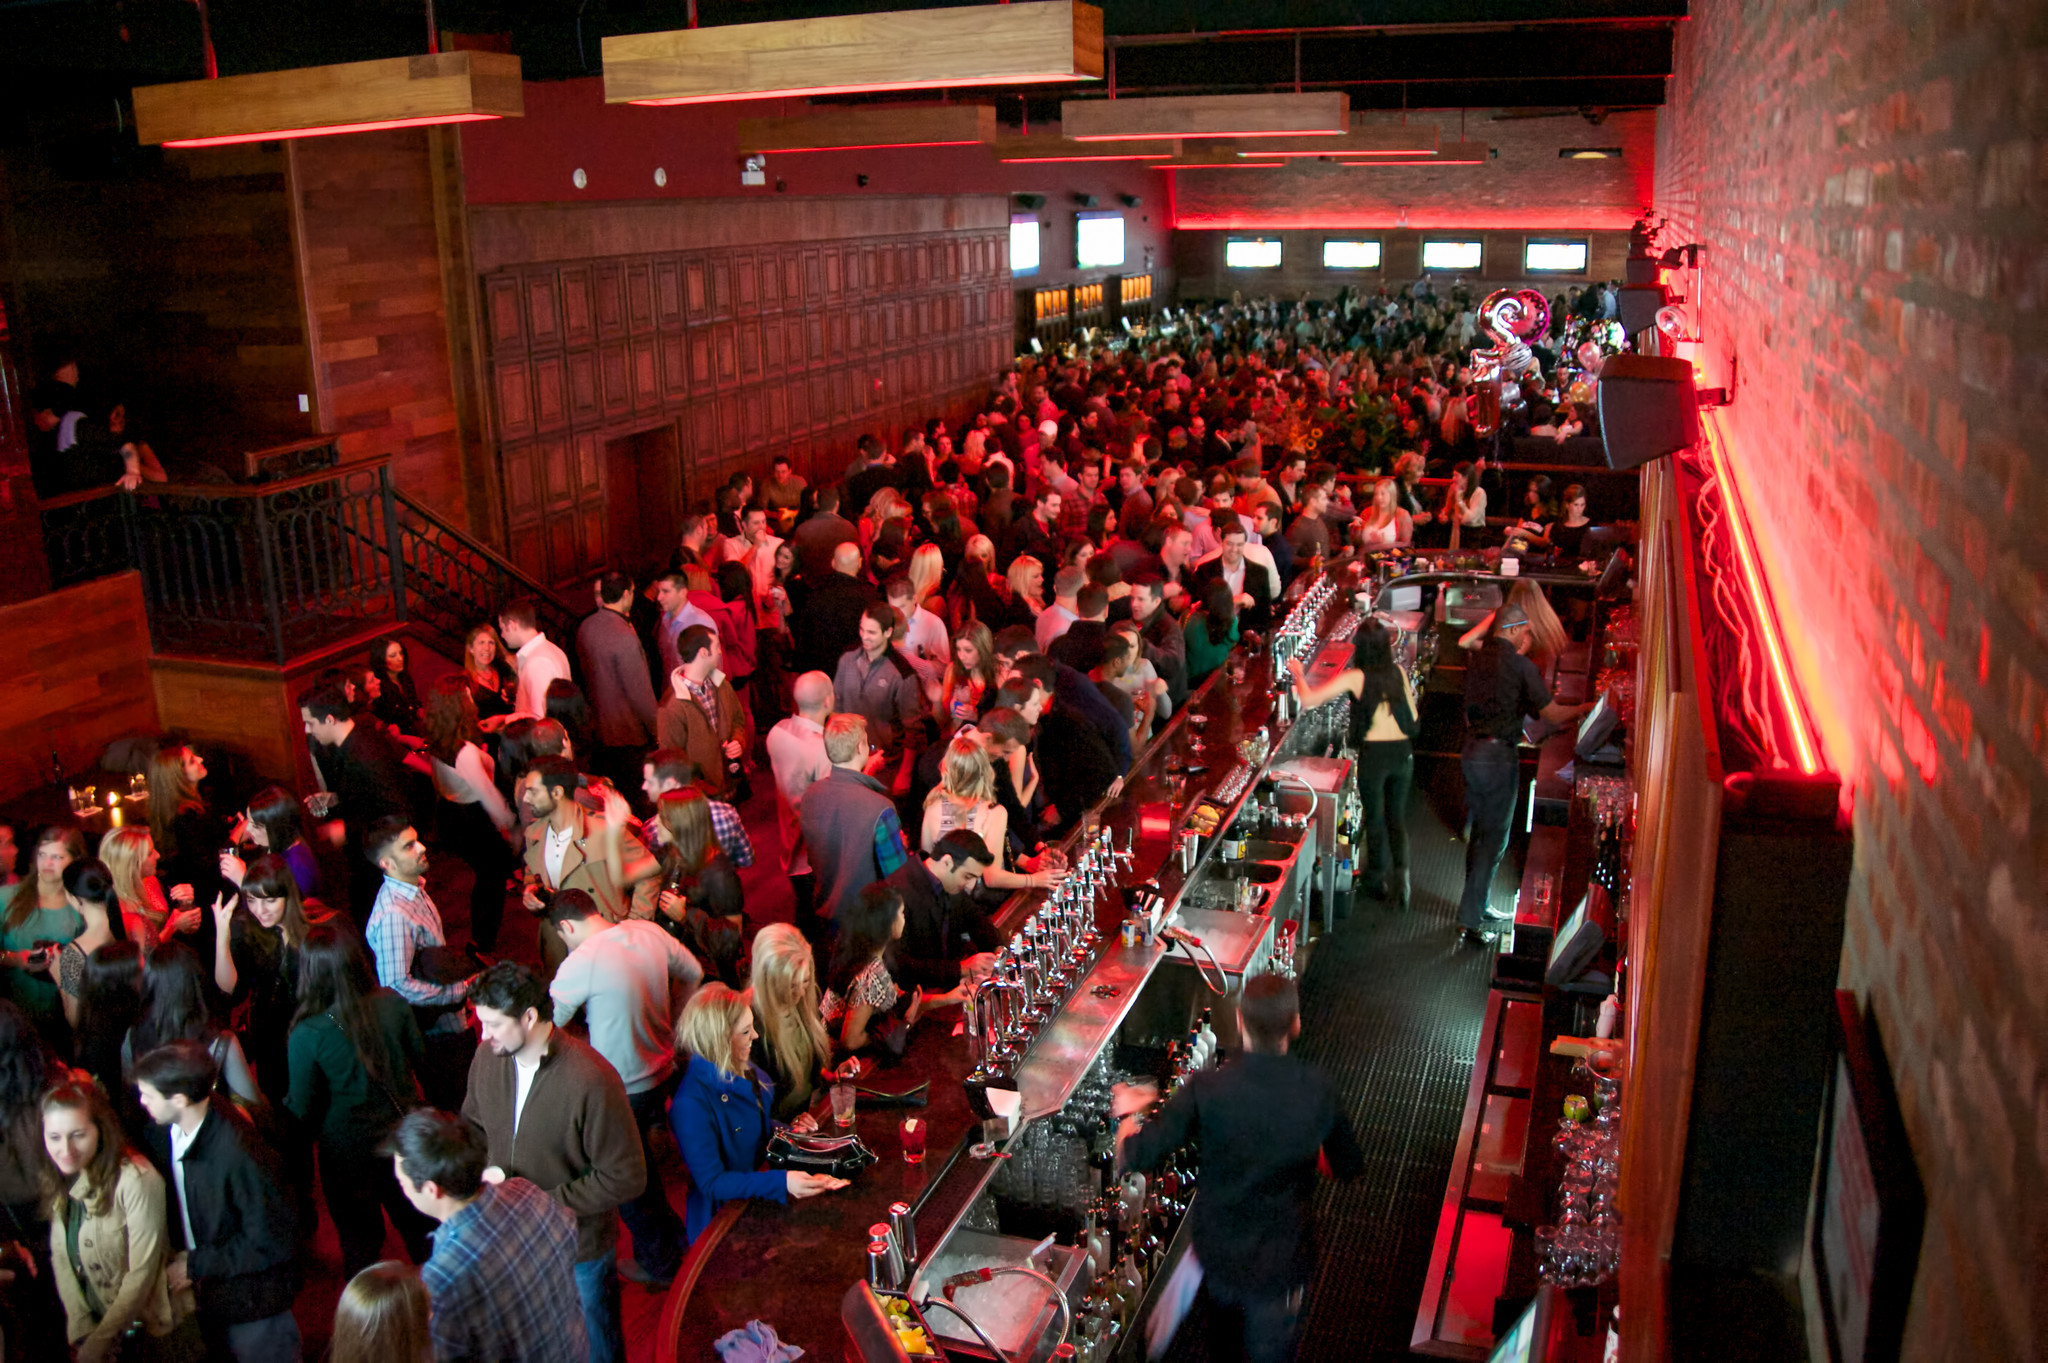 The Best Bars and Nightlife in Chicago